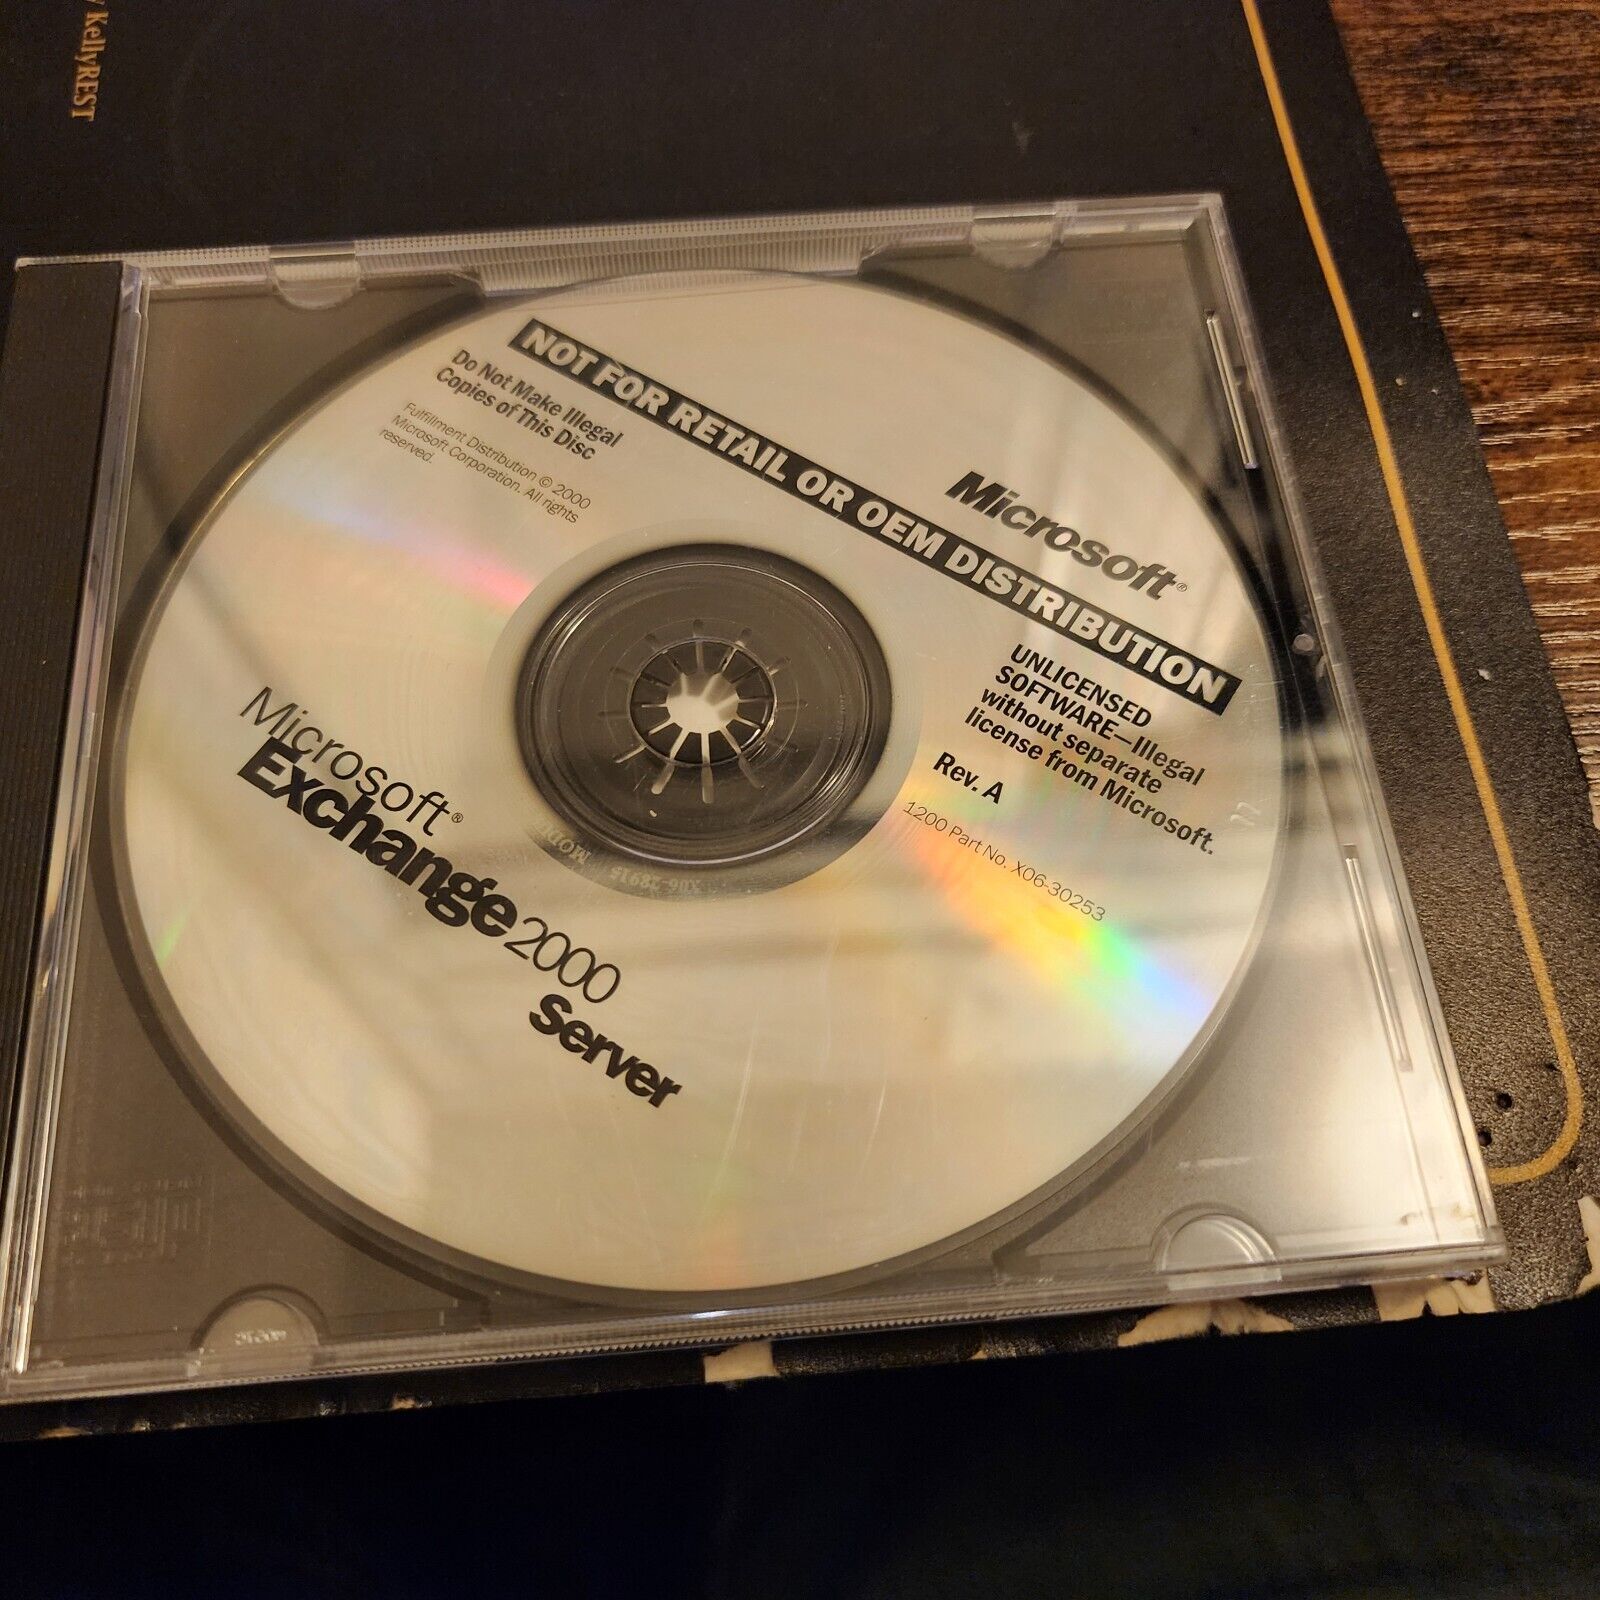 Microsoft Exchange 2000 Server RARE Developer Edition Release with Product Key